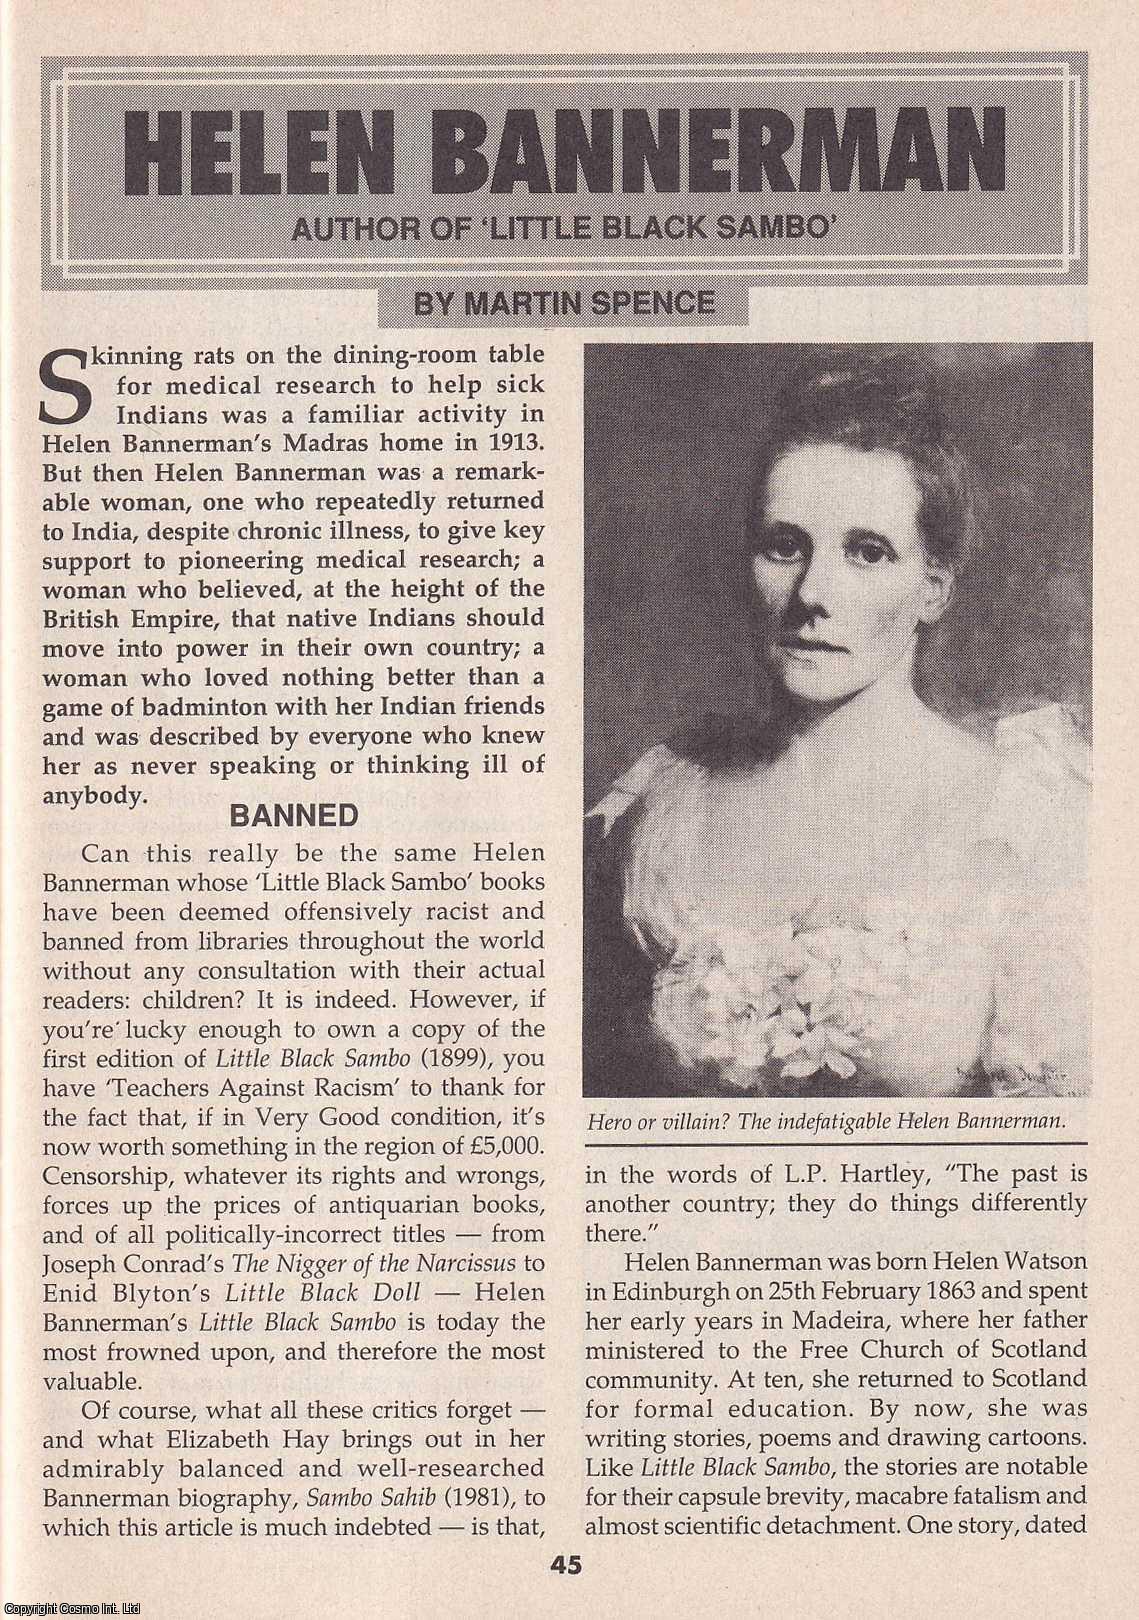 Martin Spence - Helen Bannerman : Her Stories for Children. This is an original article separated from an issue of The Book & Magazine Collector publication.